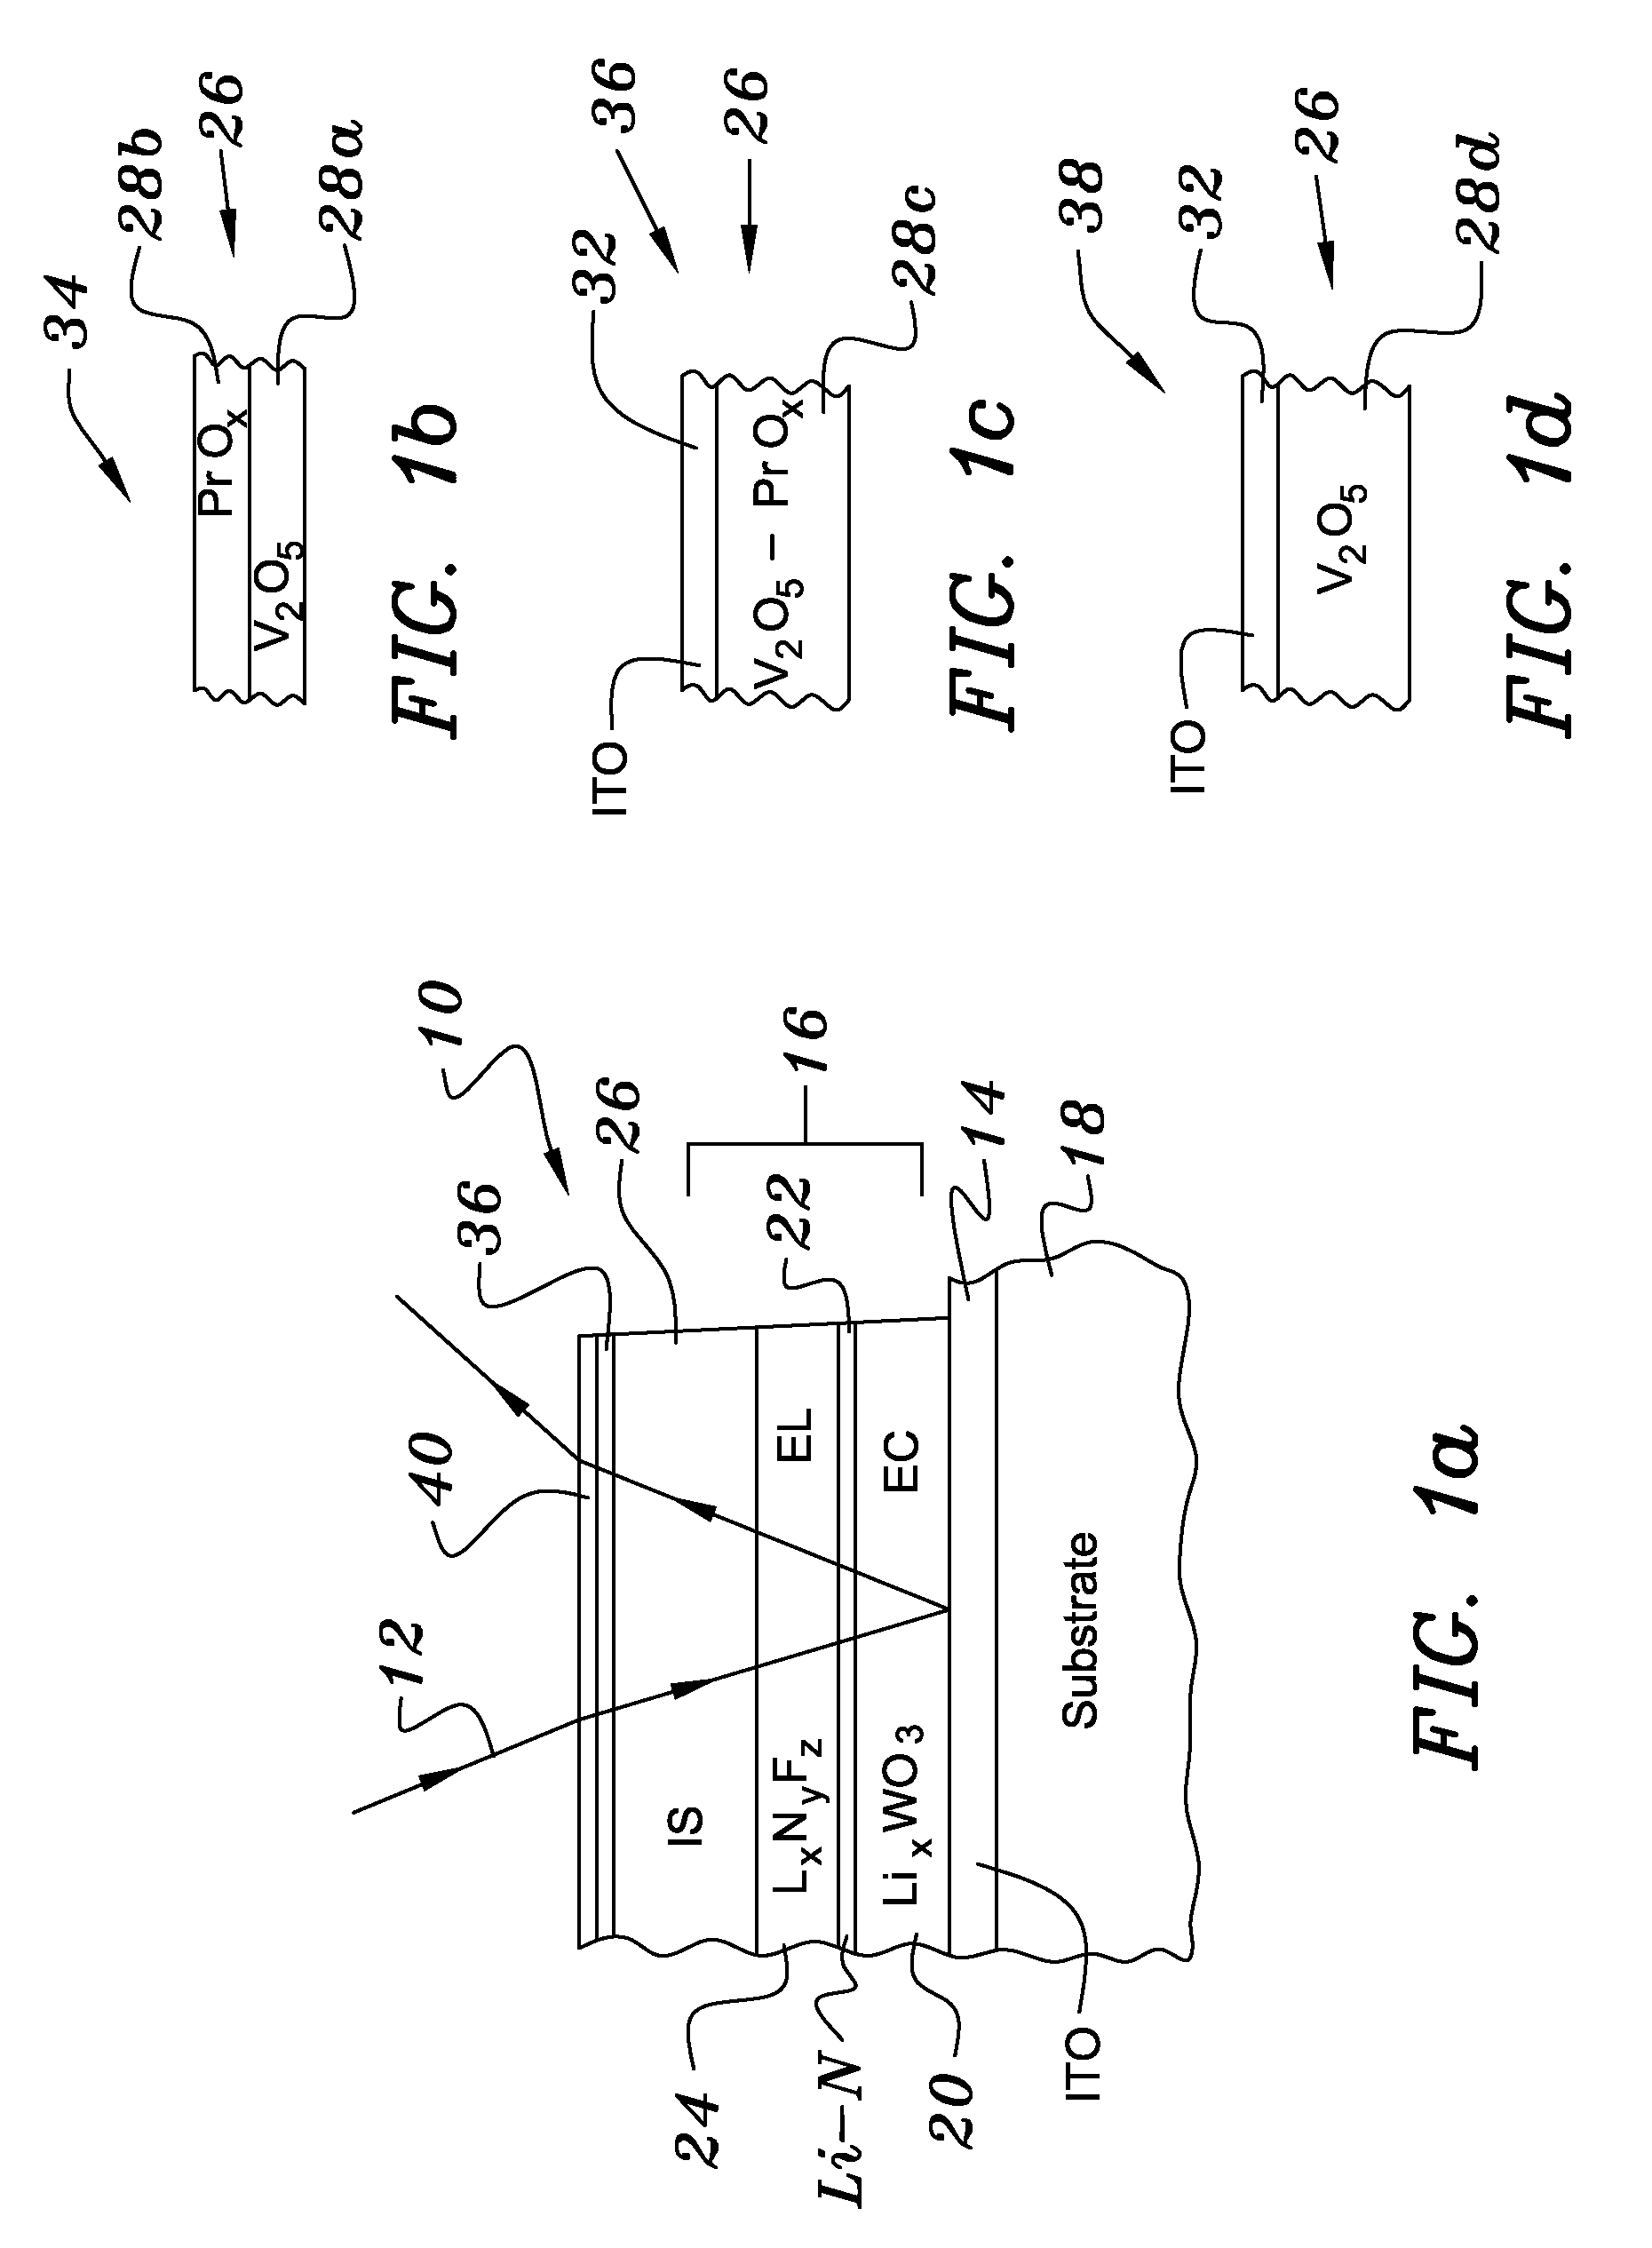 Electrochromic infrared tunable filter and emissivity modulator